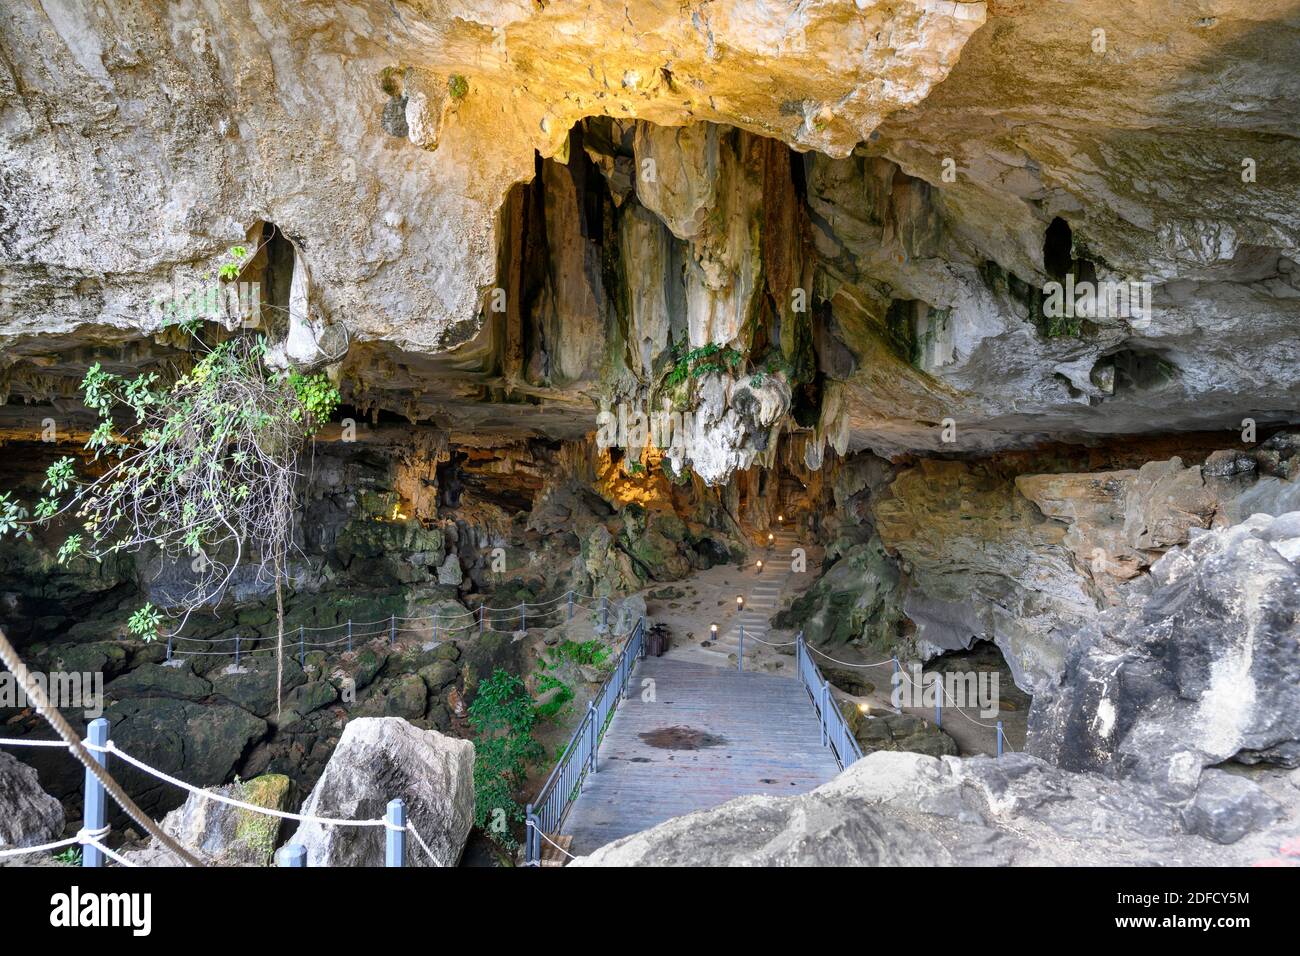 The Trinh Nu Virgin Cave In Halong Bay, Vietnam Stock Photo